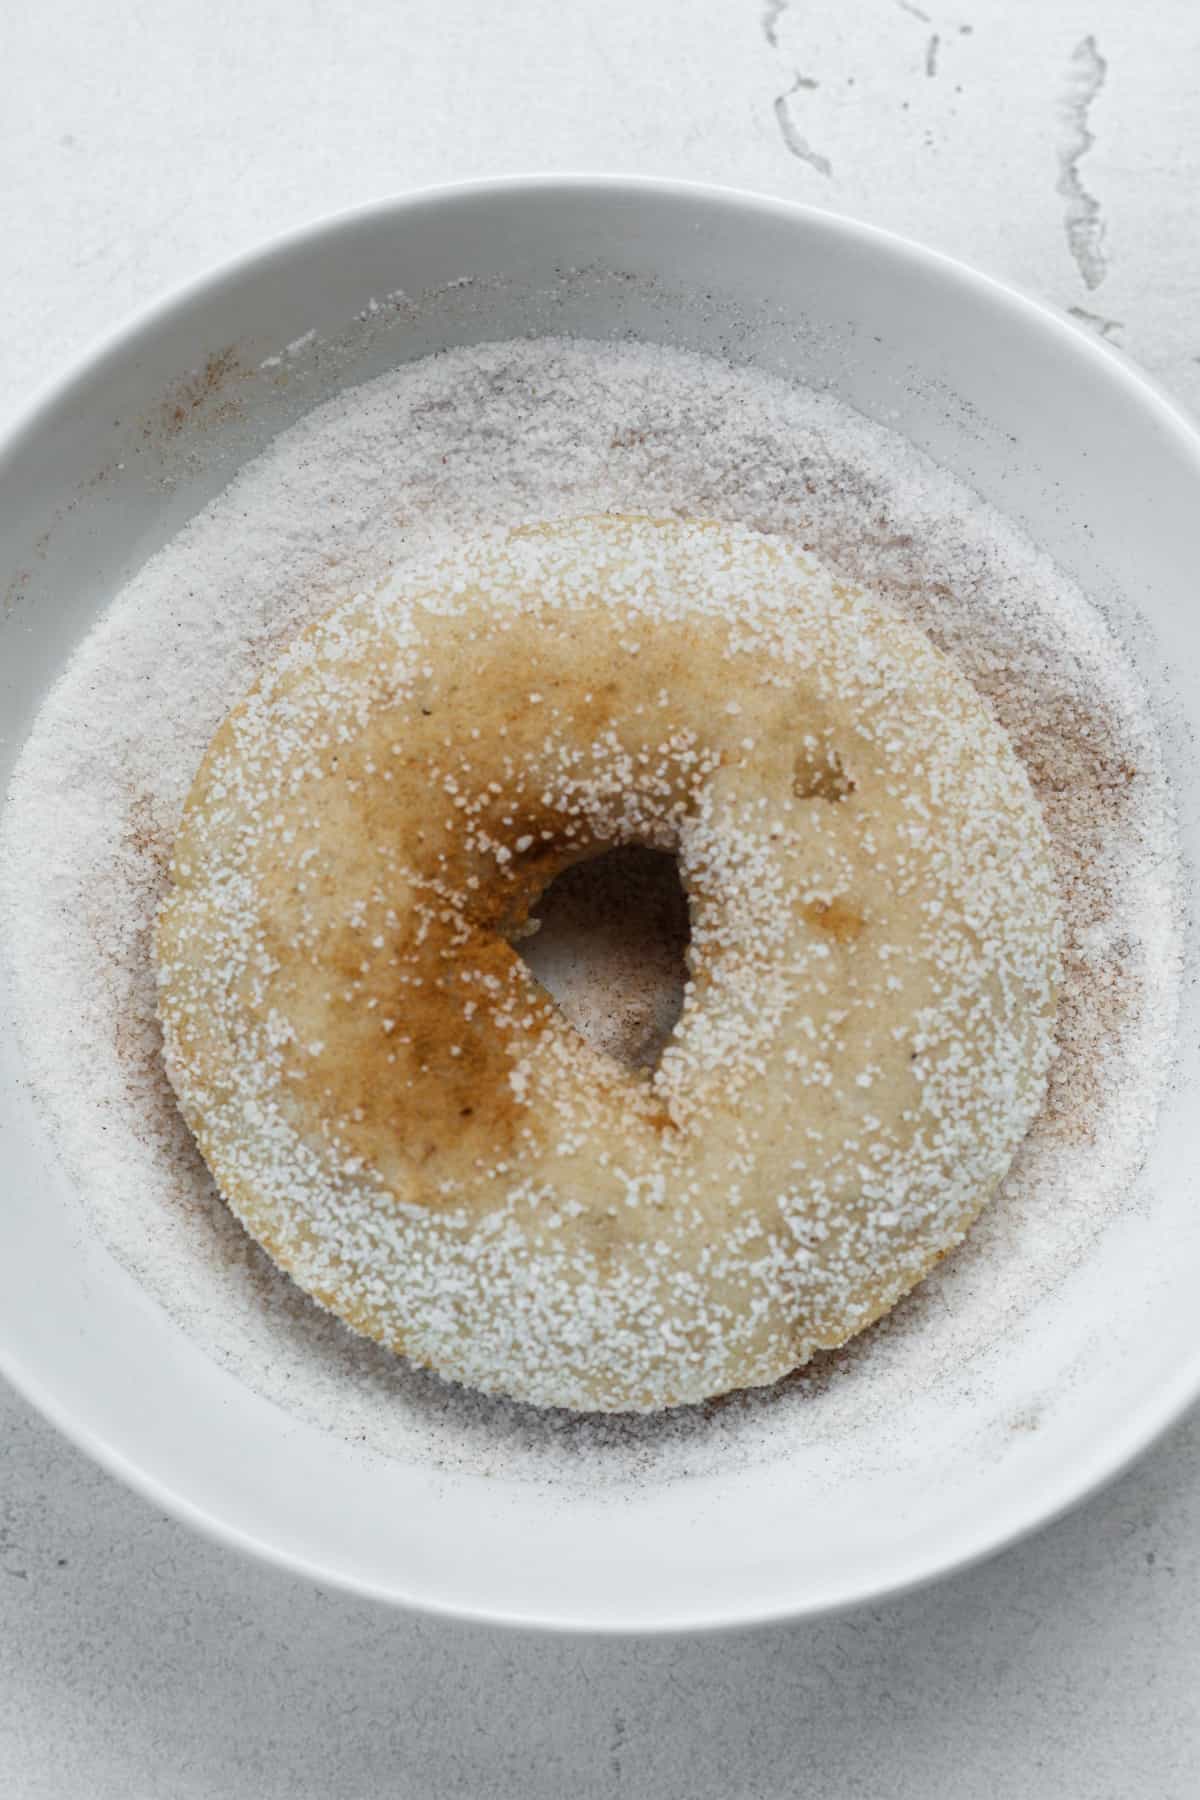 Donut with sugar coating.